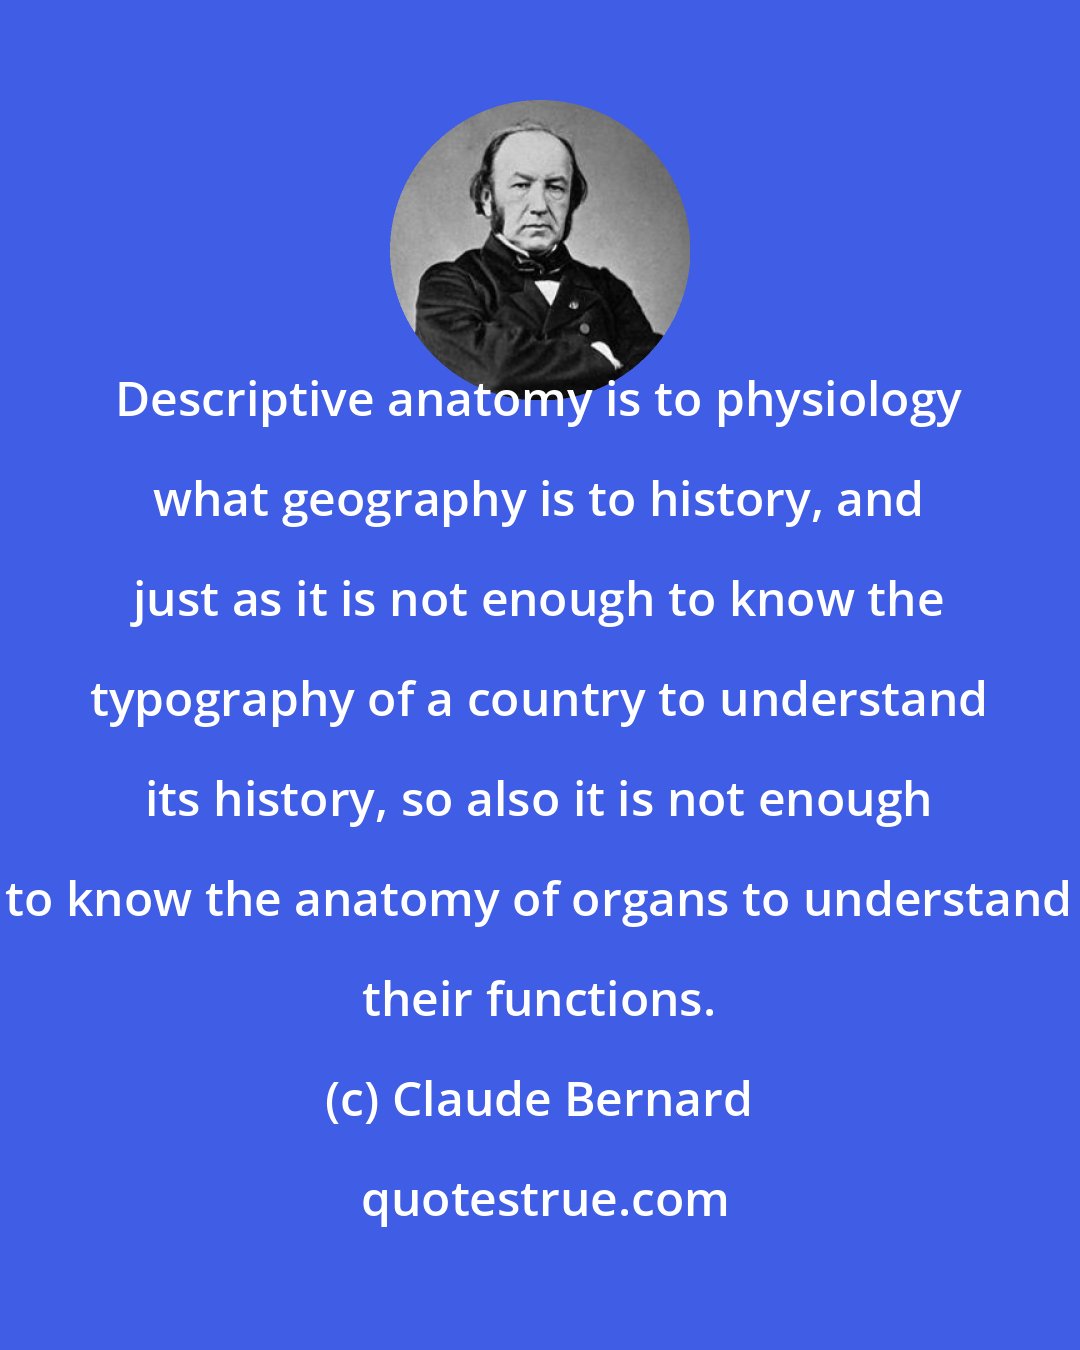 Claude Bernard: Descriptive anatomy is to physiology what geography is to history, and just as it is not enough to know the typography of a country to understand its history, so also it is not enough to know the anatomy of organs to understand their functions.